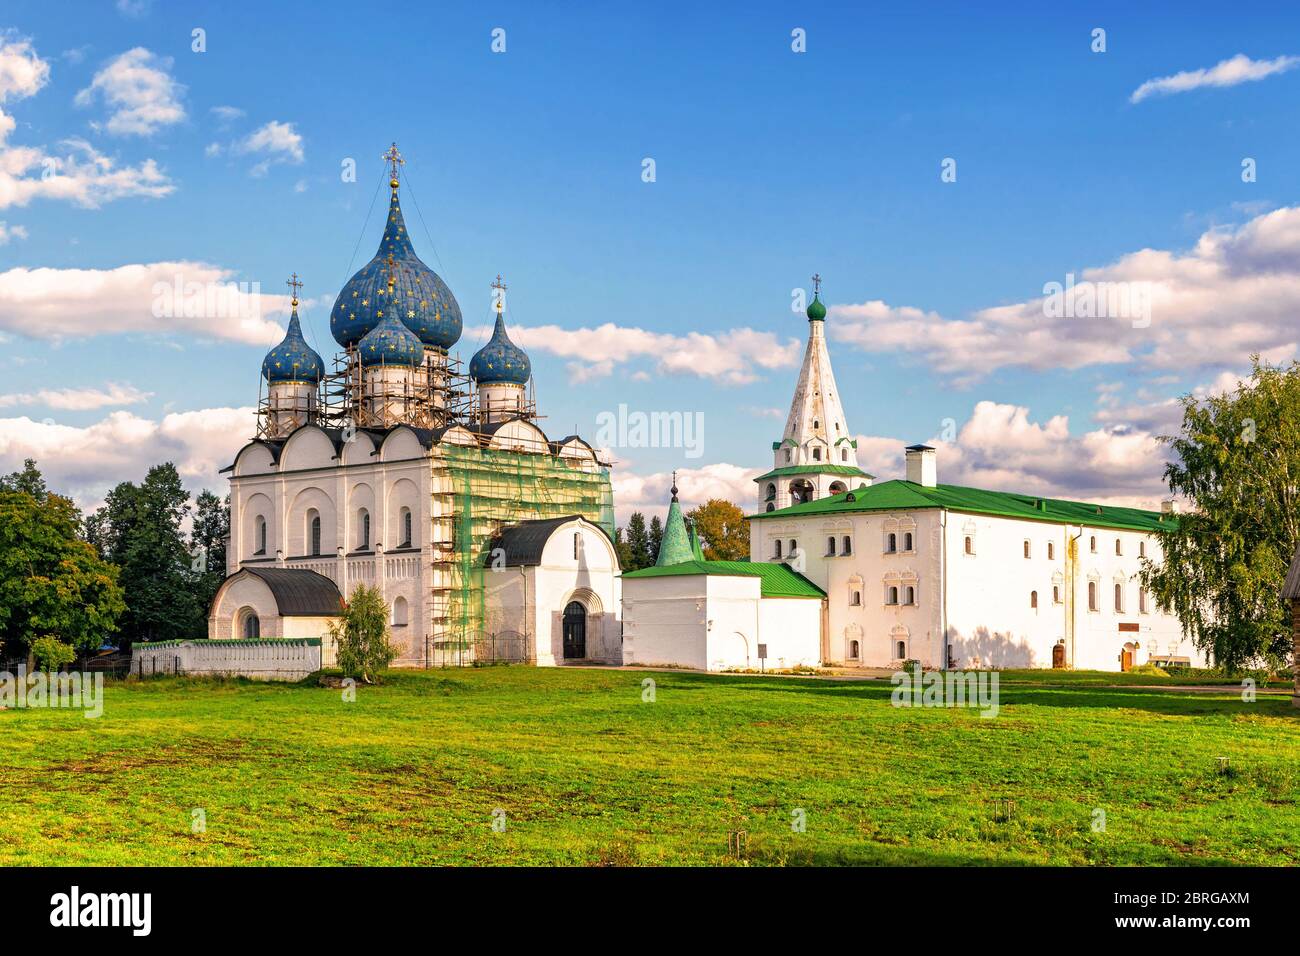 Suzdal Kremlin at sunset. Suzdal, Golden Ring of Russia. Stock Photo